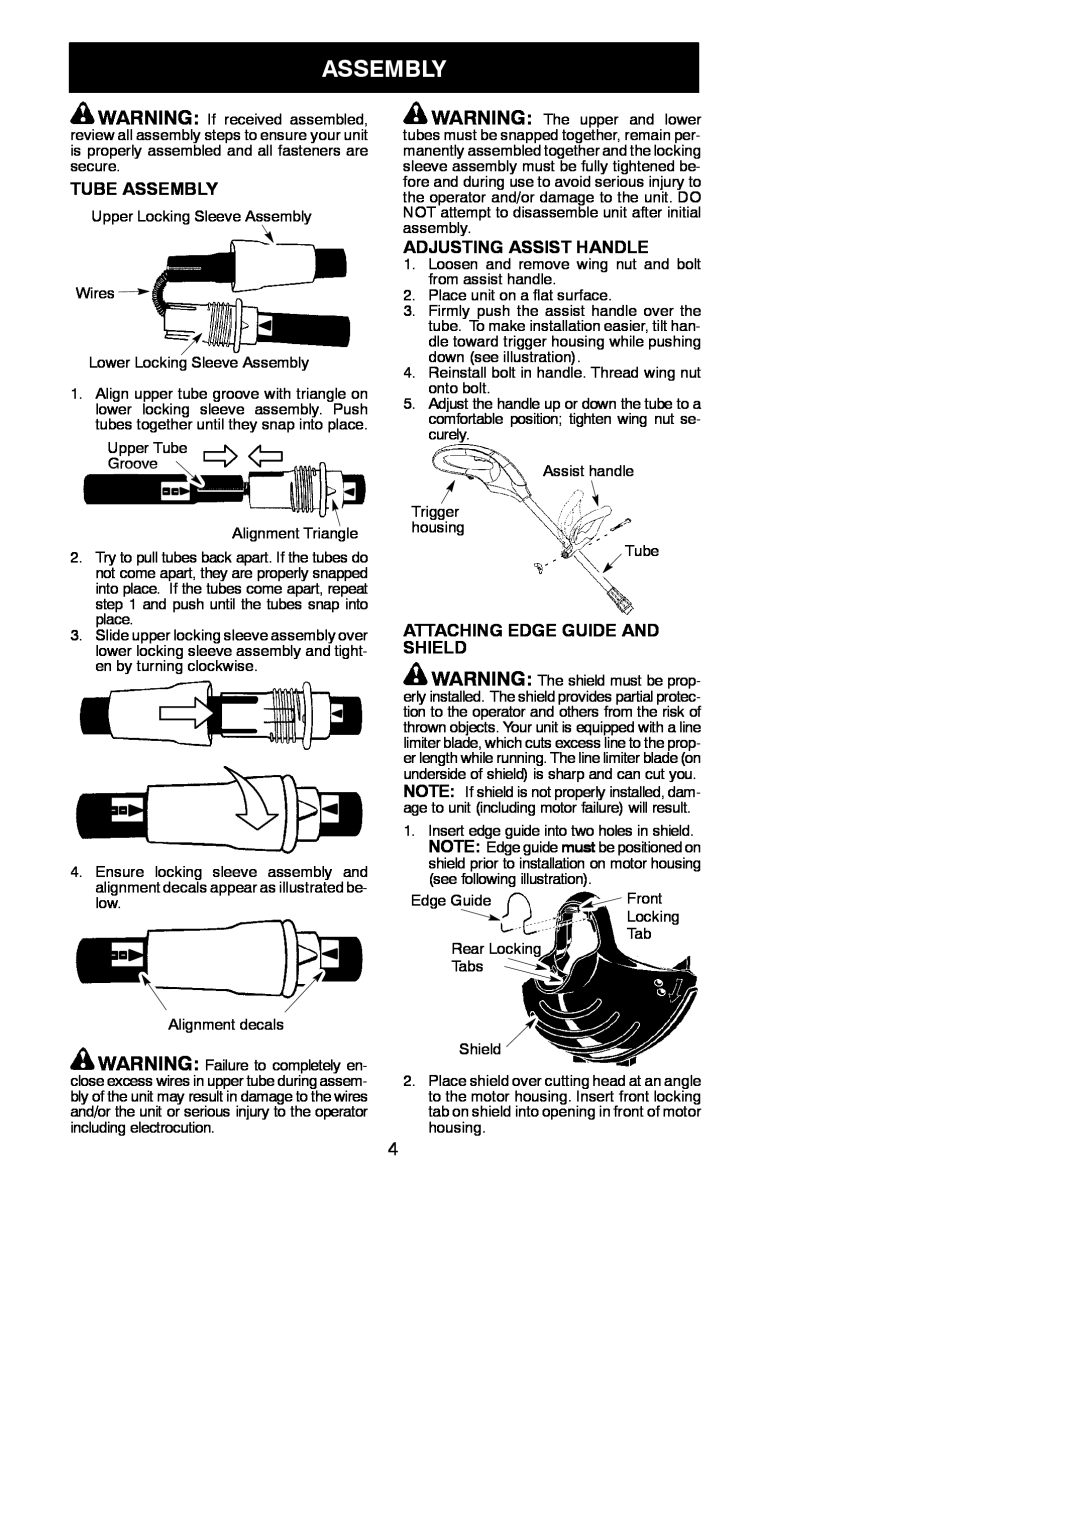 Weed Eater 545186761 instruction manual Tube Assembly, Adjusting Assist Handle, Attaching Edge Guide And Shield 